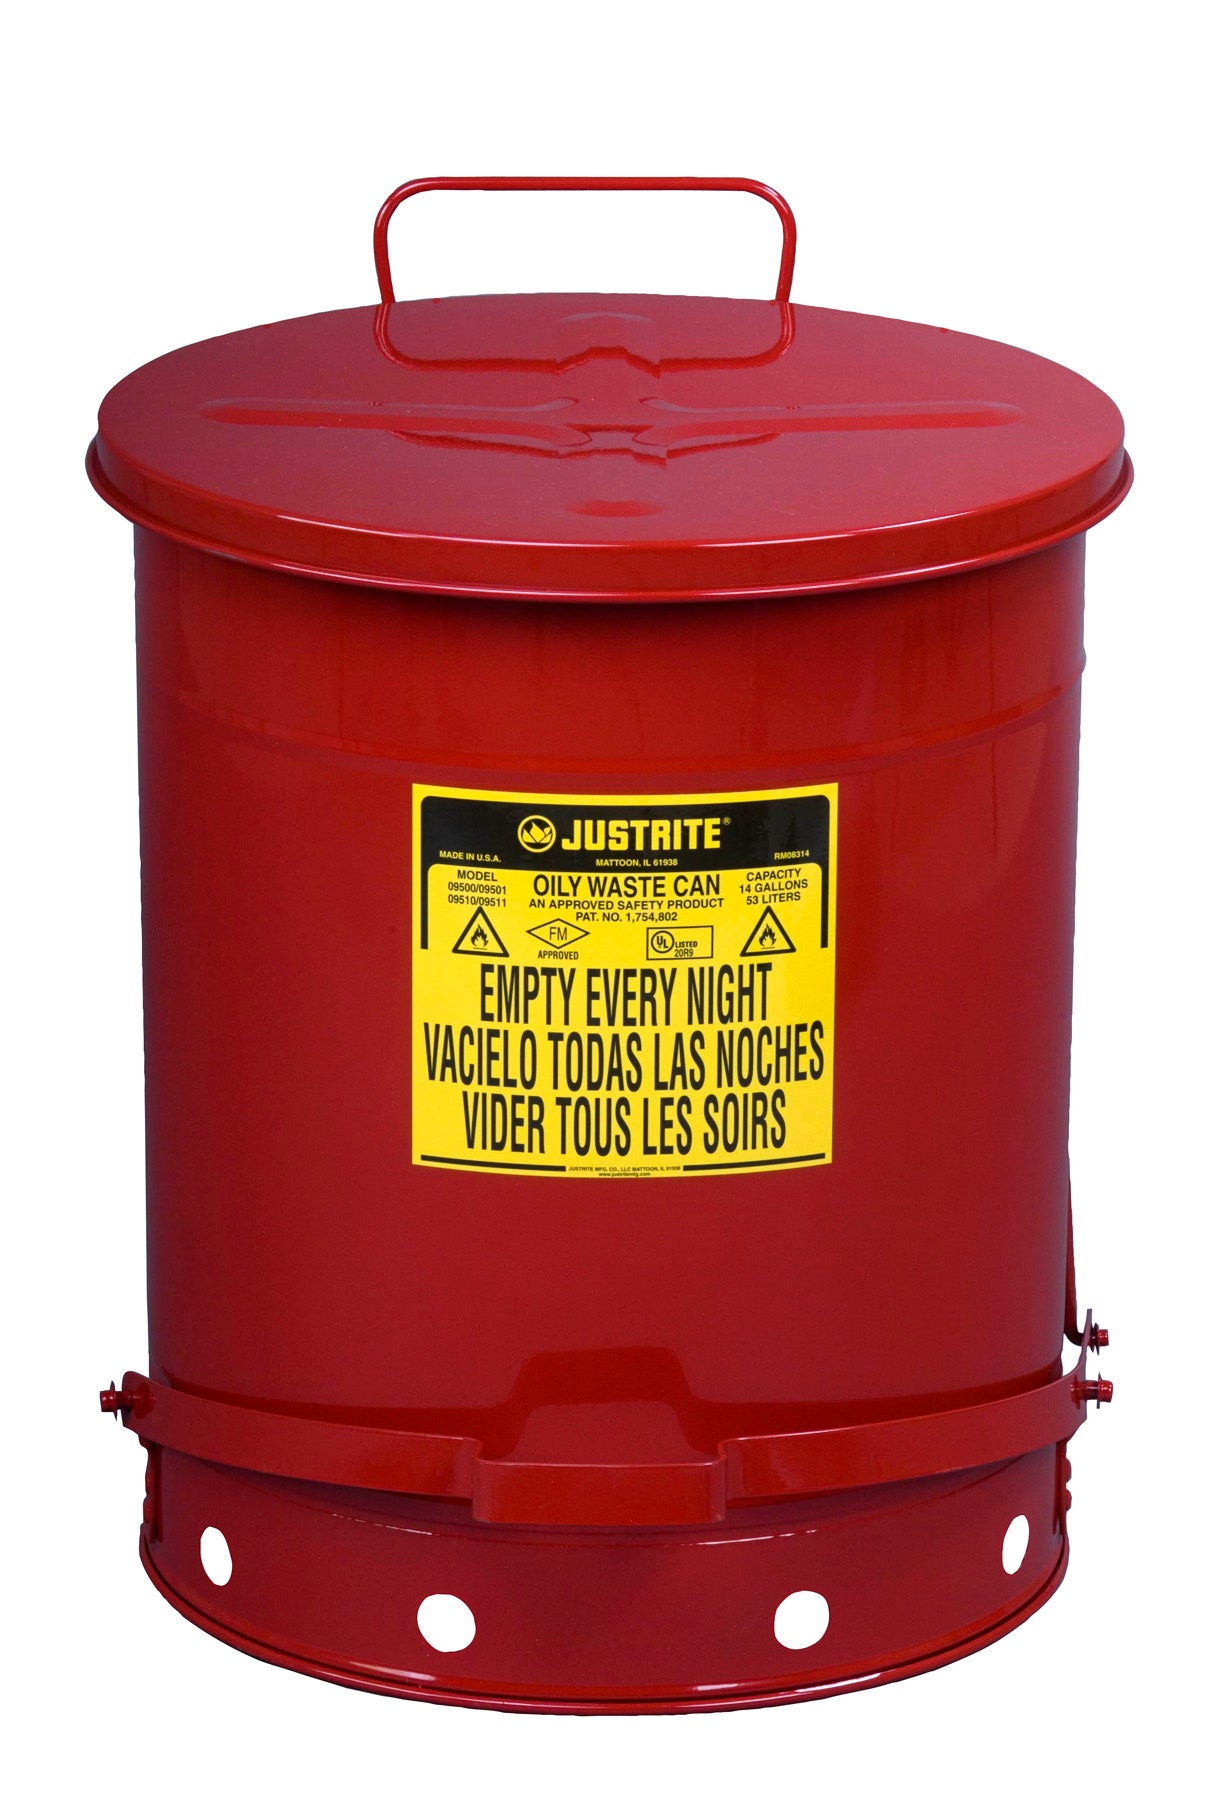 Justrite 14-Gallon Metal Oily Waste Can w/ Foot Operated Cover